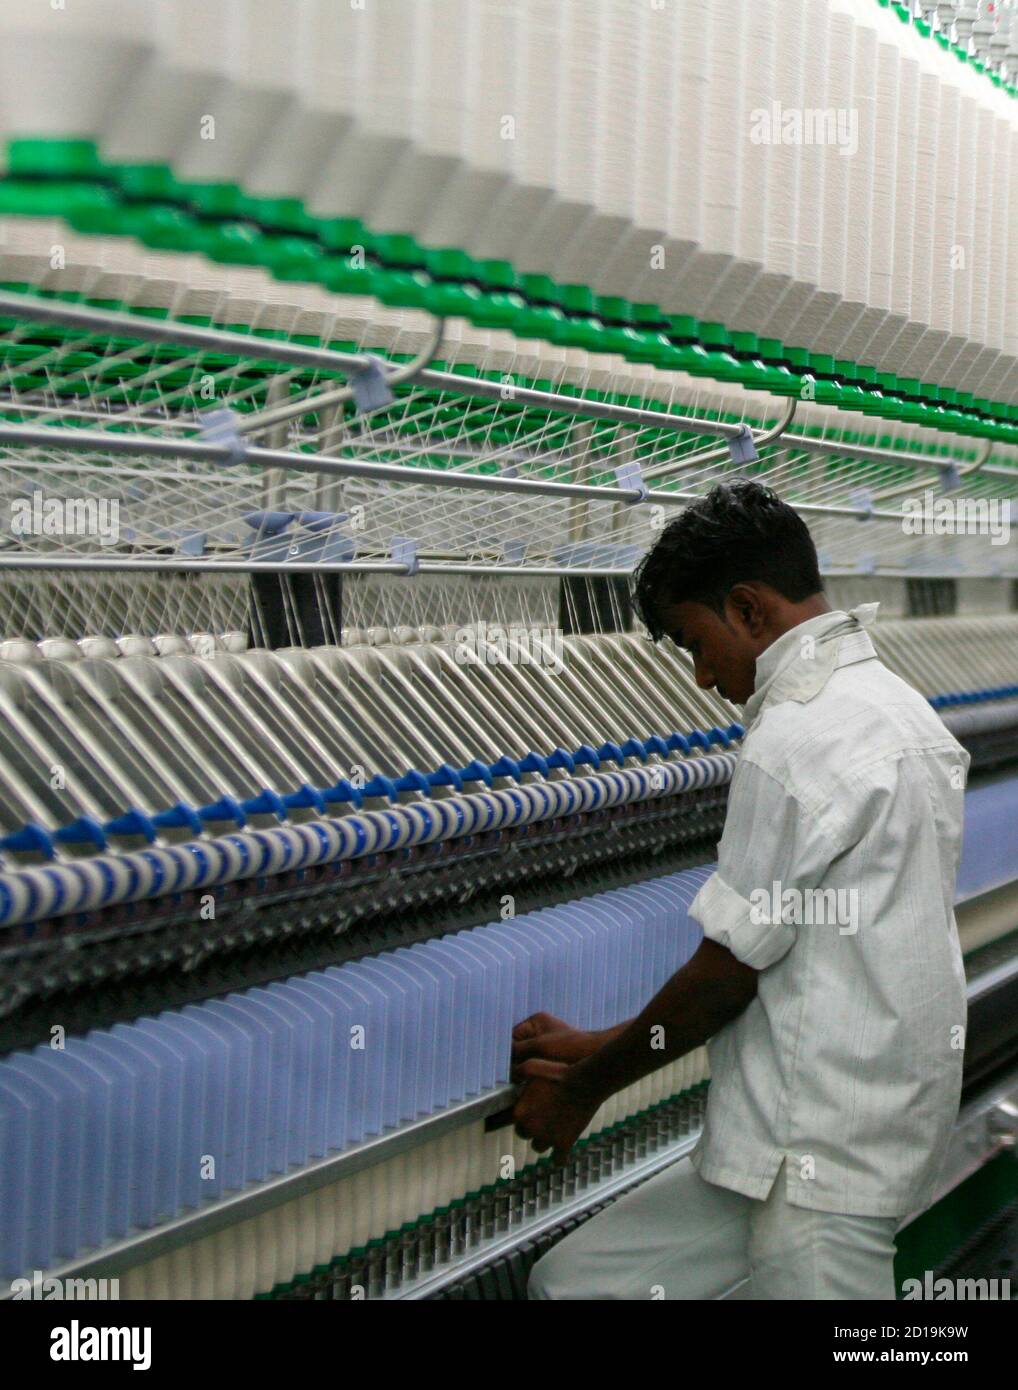 An employee works inside the Century Textiles and Industries Ltd. mill in Jhagadia village in the western Indian state of Gujarat October 22, 2009. Indian mill demand is likely to be boosted by an ongoing recovery in textile and apparel consumption in developed economies. REUTERS/Amit Dave (INDIA BUSINESS EMPLOYMENT) Stock Photo